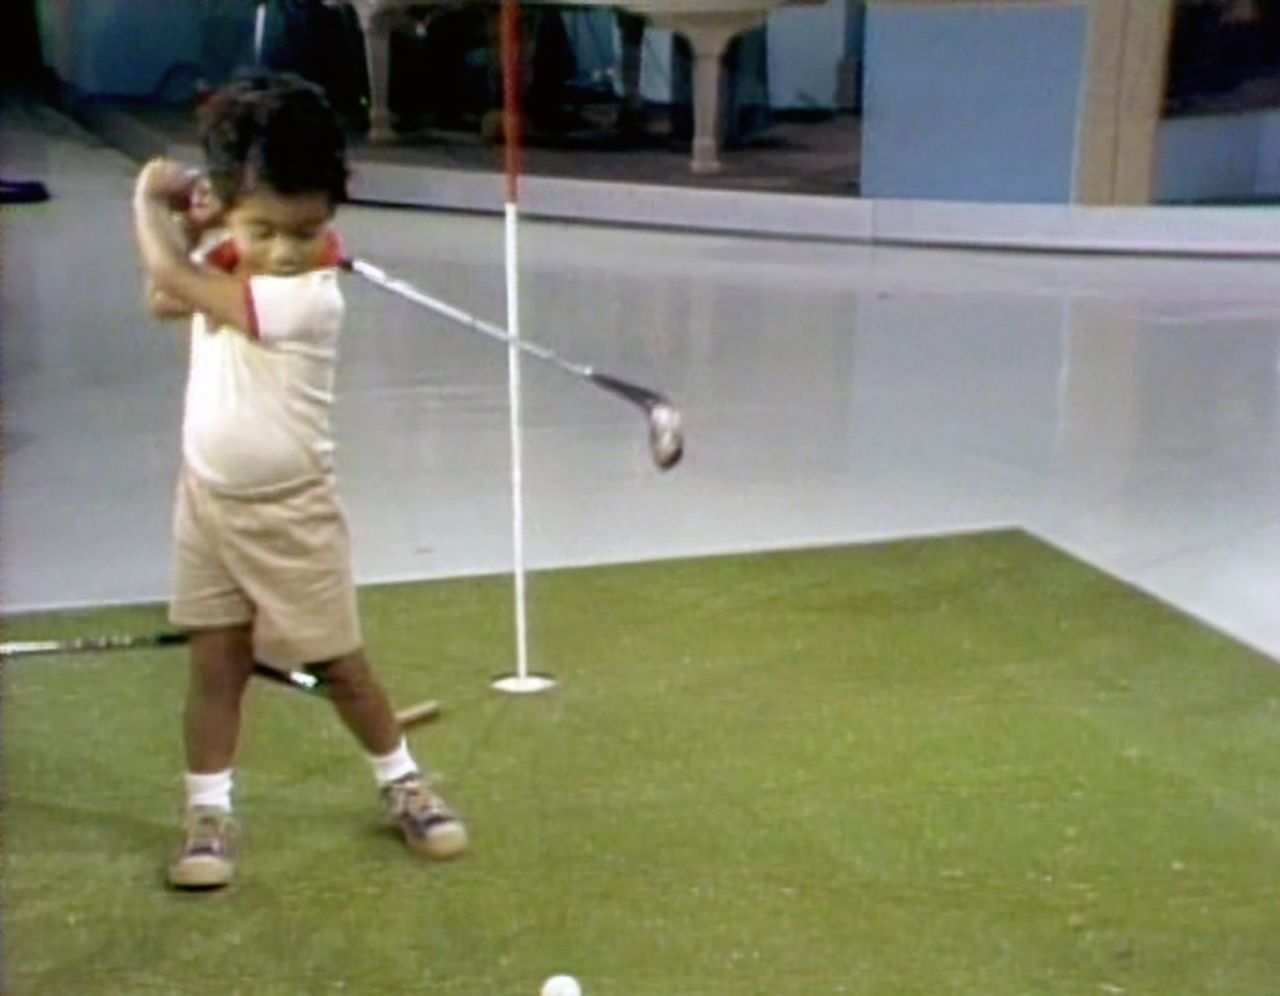 Woods had his first brush with fame when he was just 2 years old. The young golfing prodigy appeared on "The Mike Douglas Show" in 1978, winning a putting contest with comedian Bob Hope.